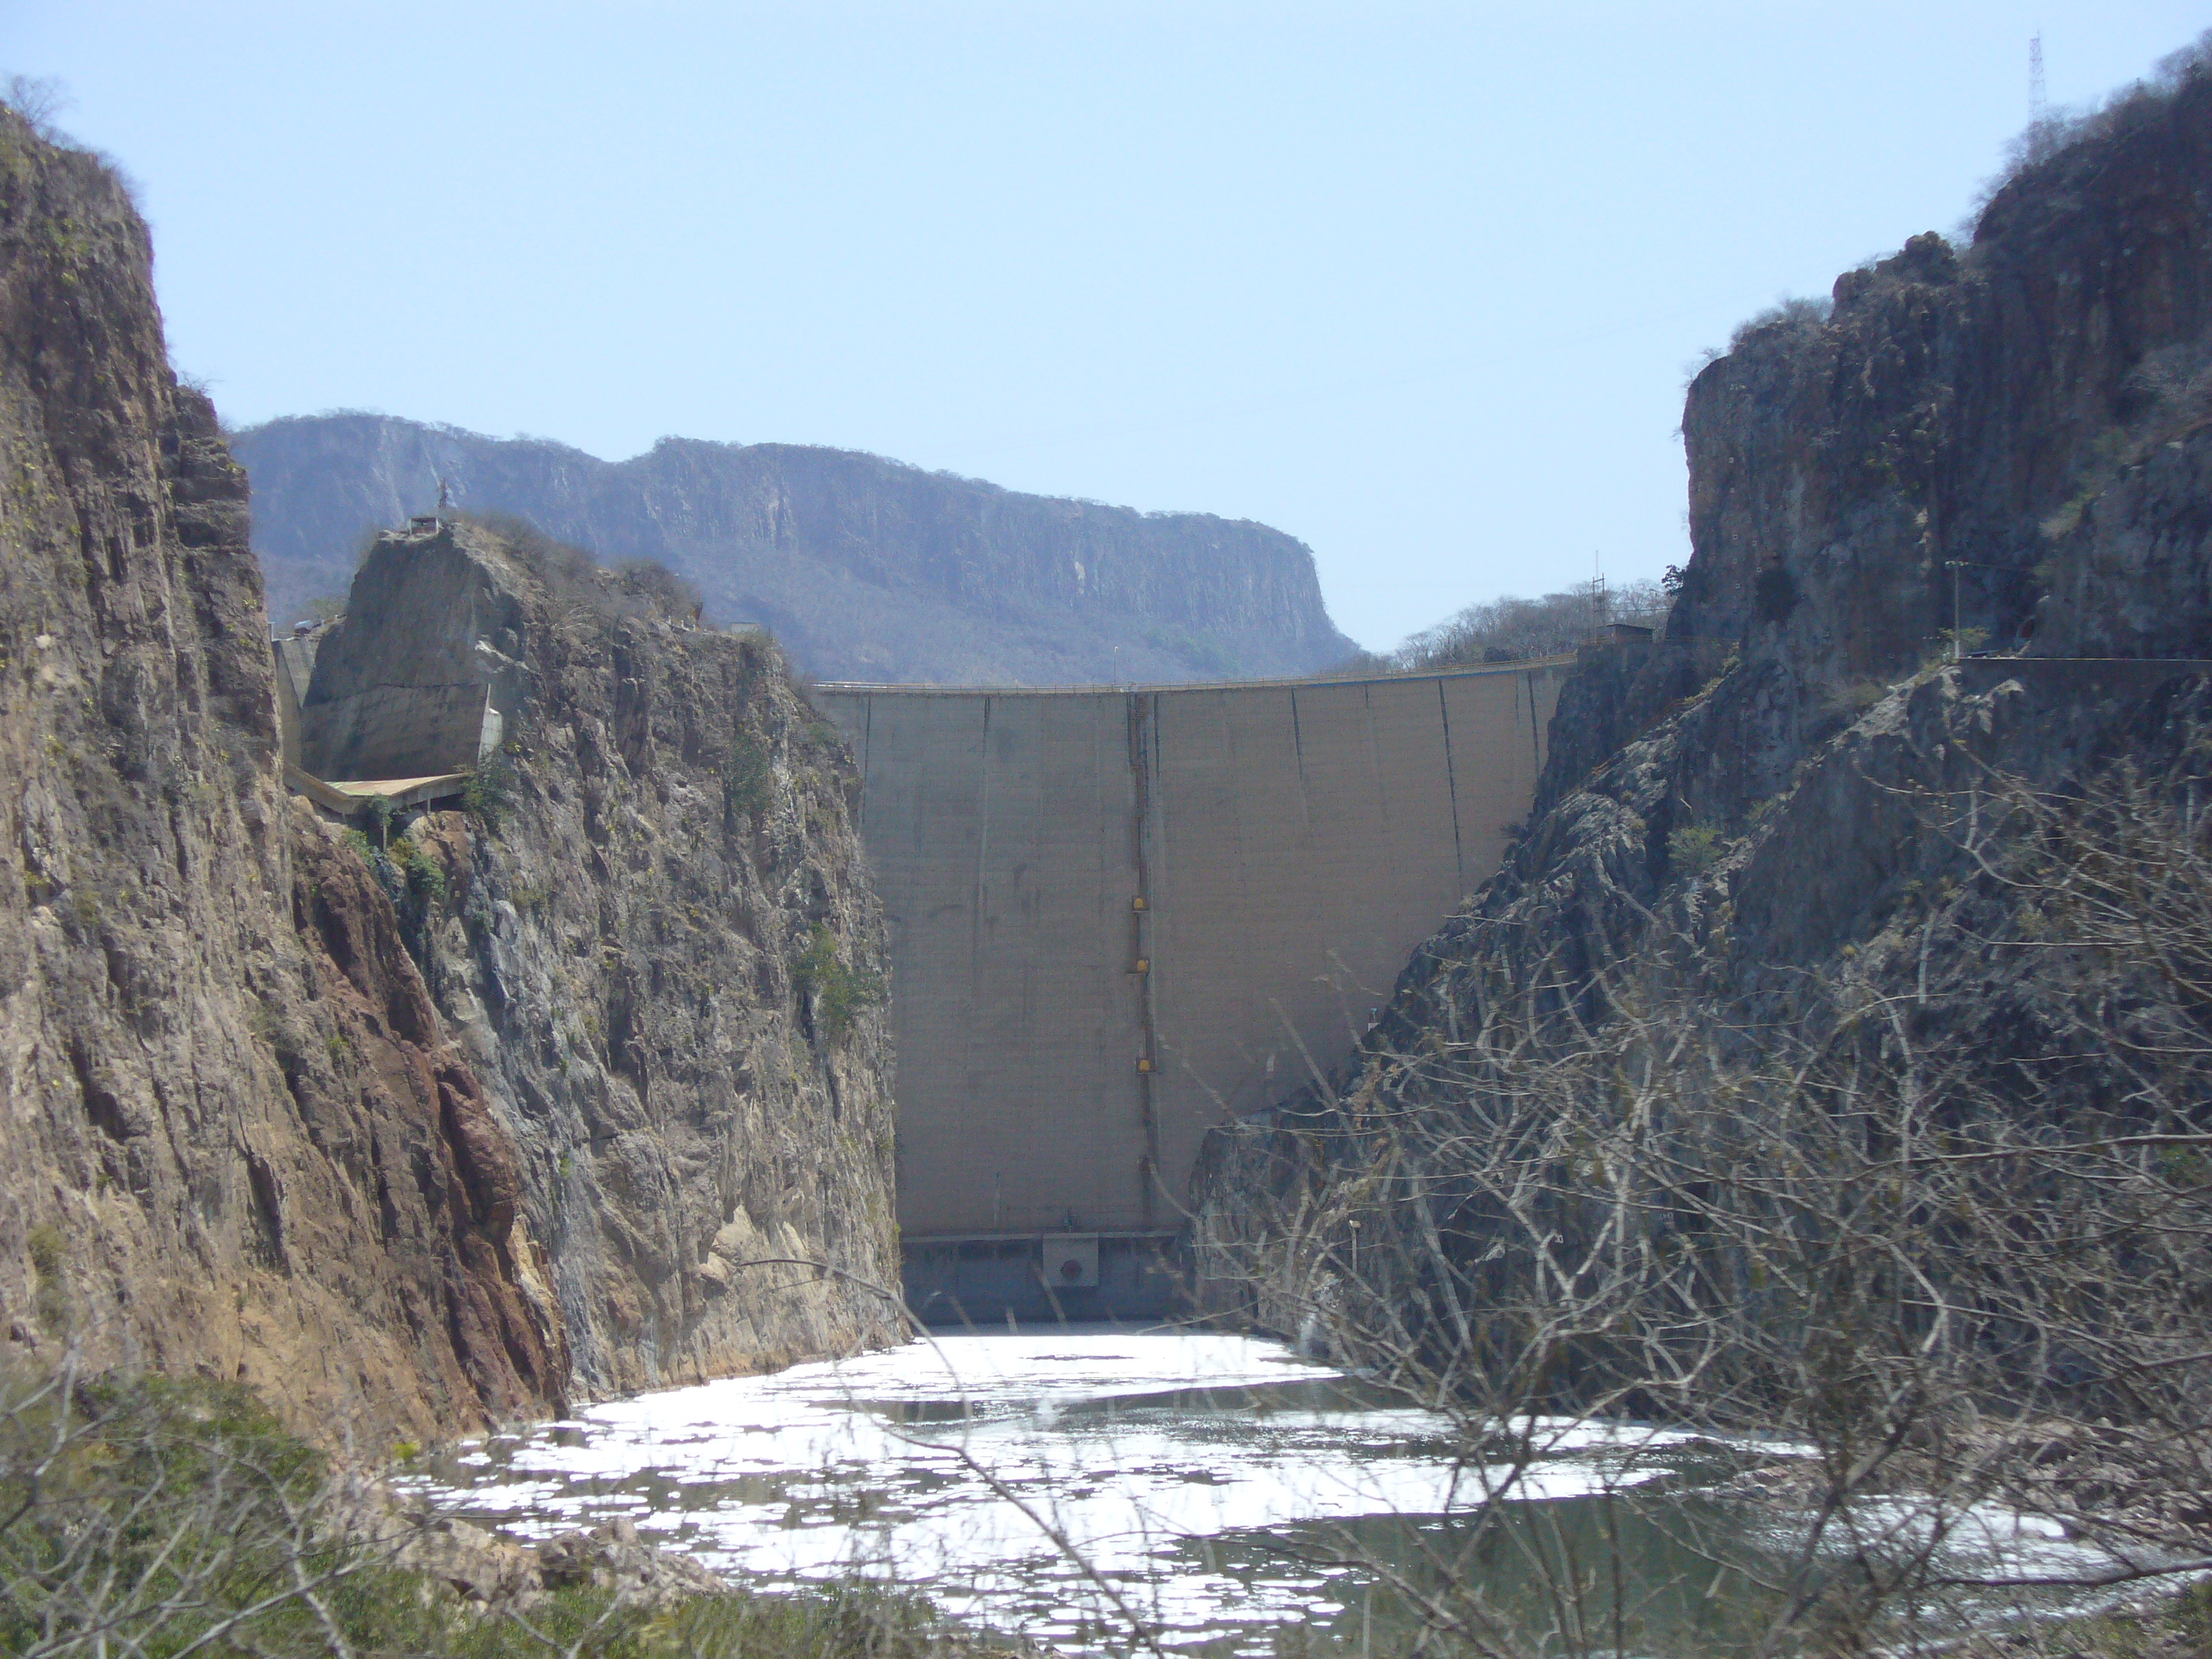 The Santa Rosa dam on the Santiago River is almost
		 entirely filled with sediment.